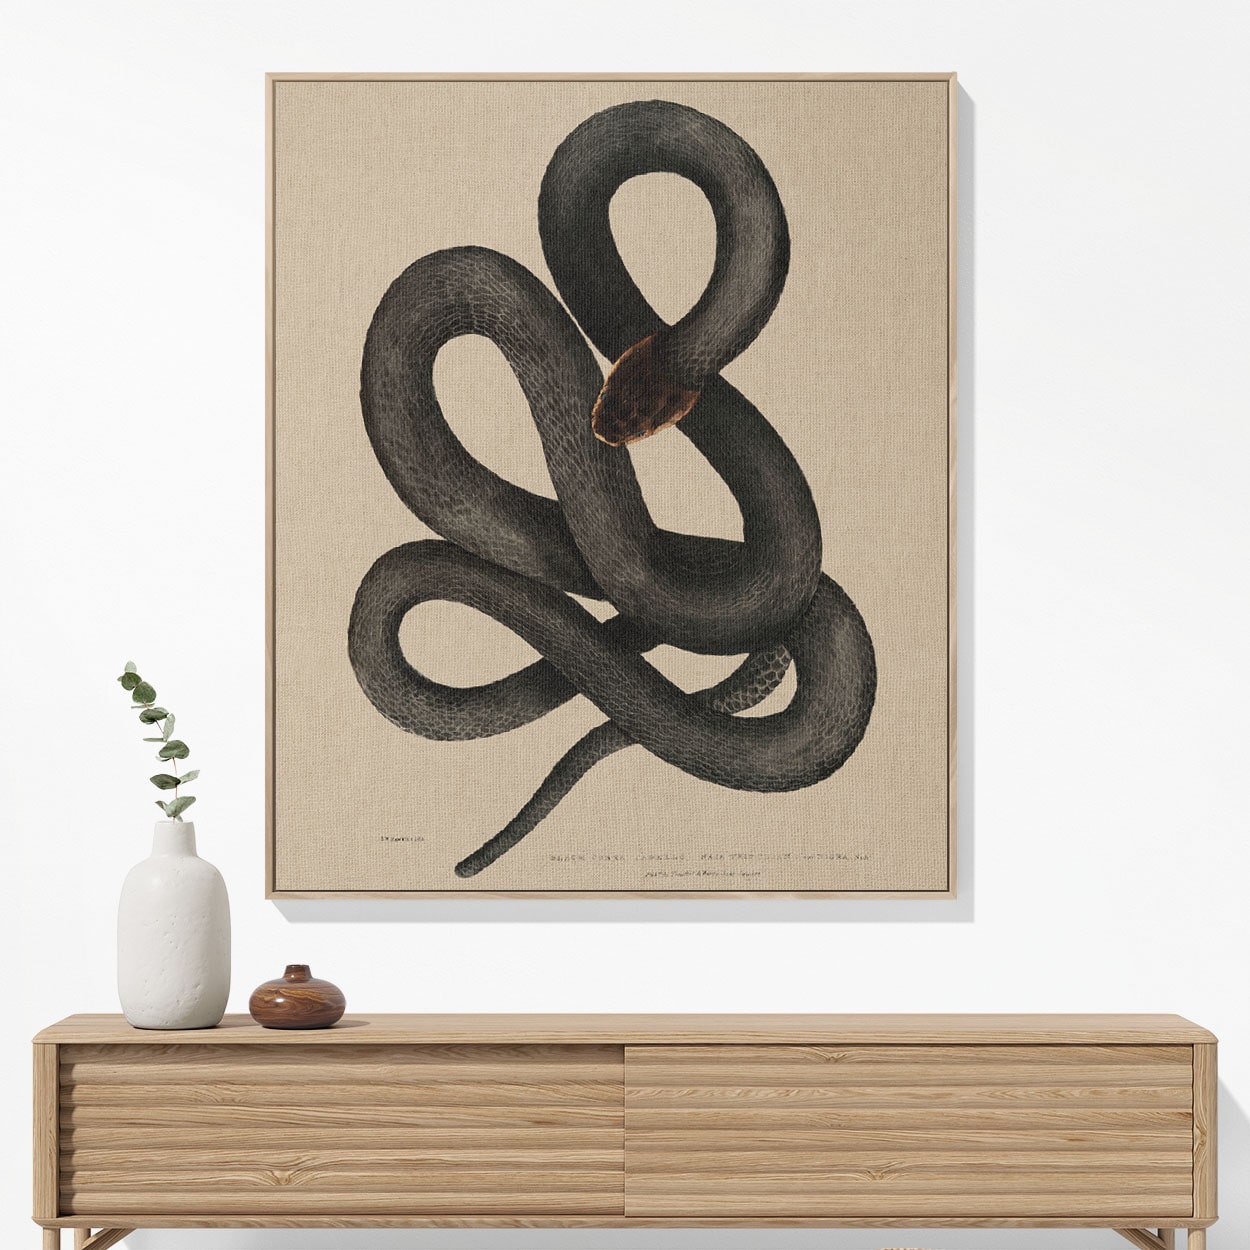 Cool Snake Woven Blanket Woven Blanket Hanging on a Wall as Framed Wall Art